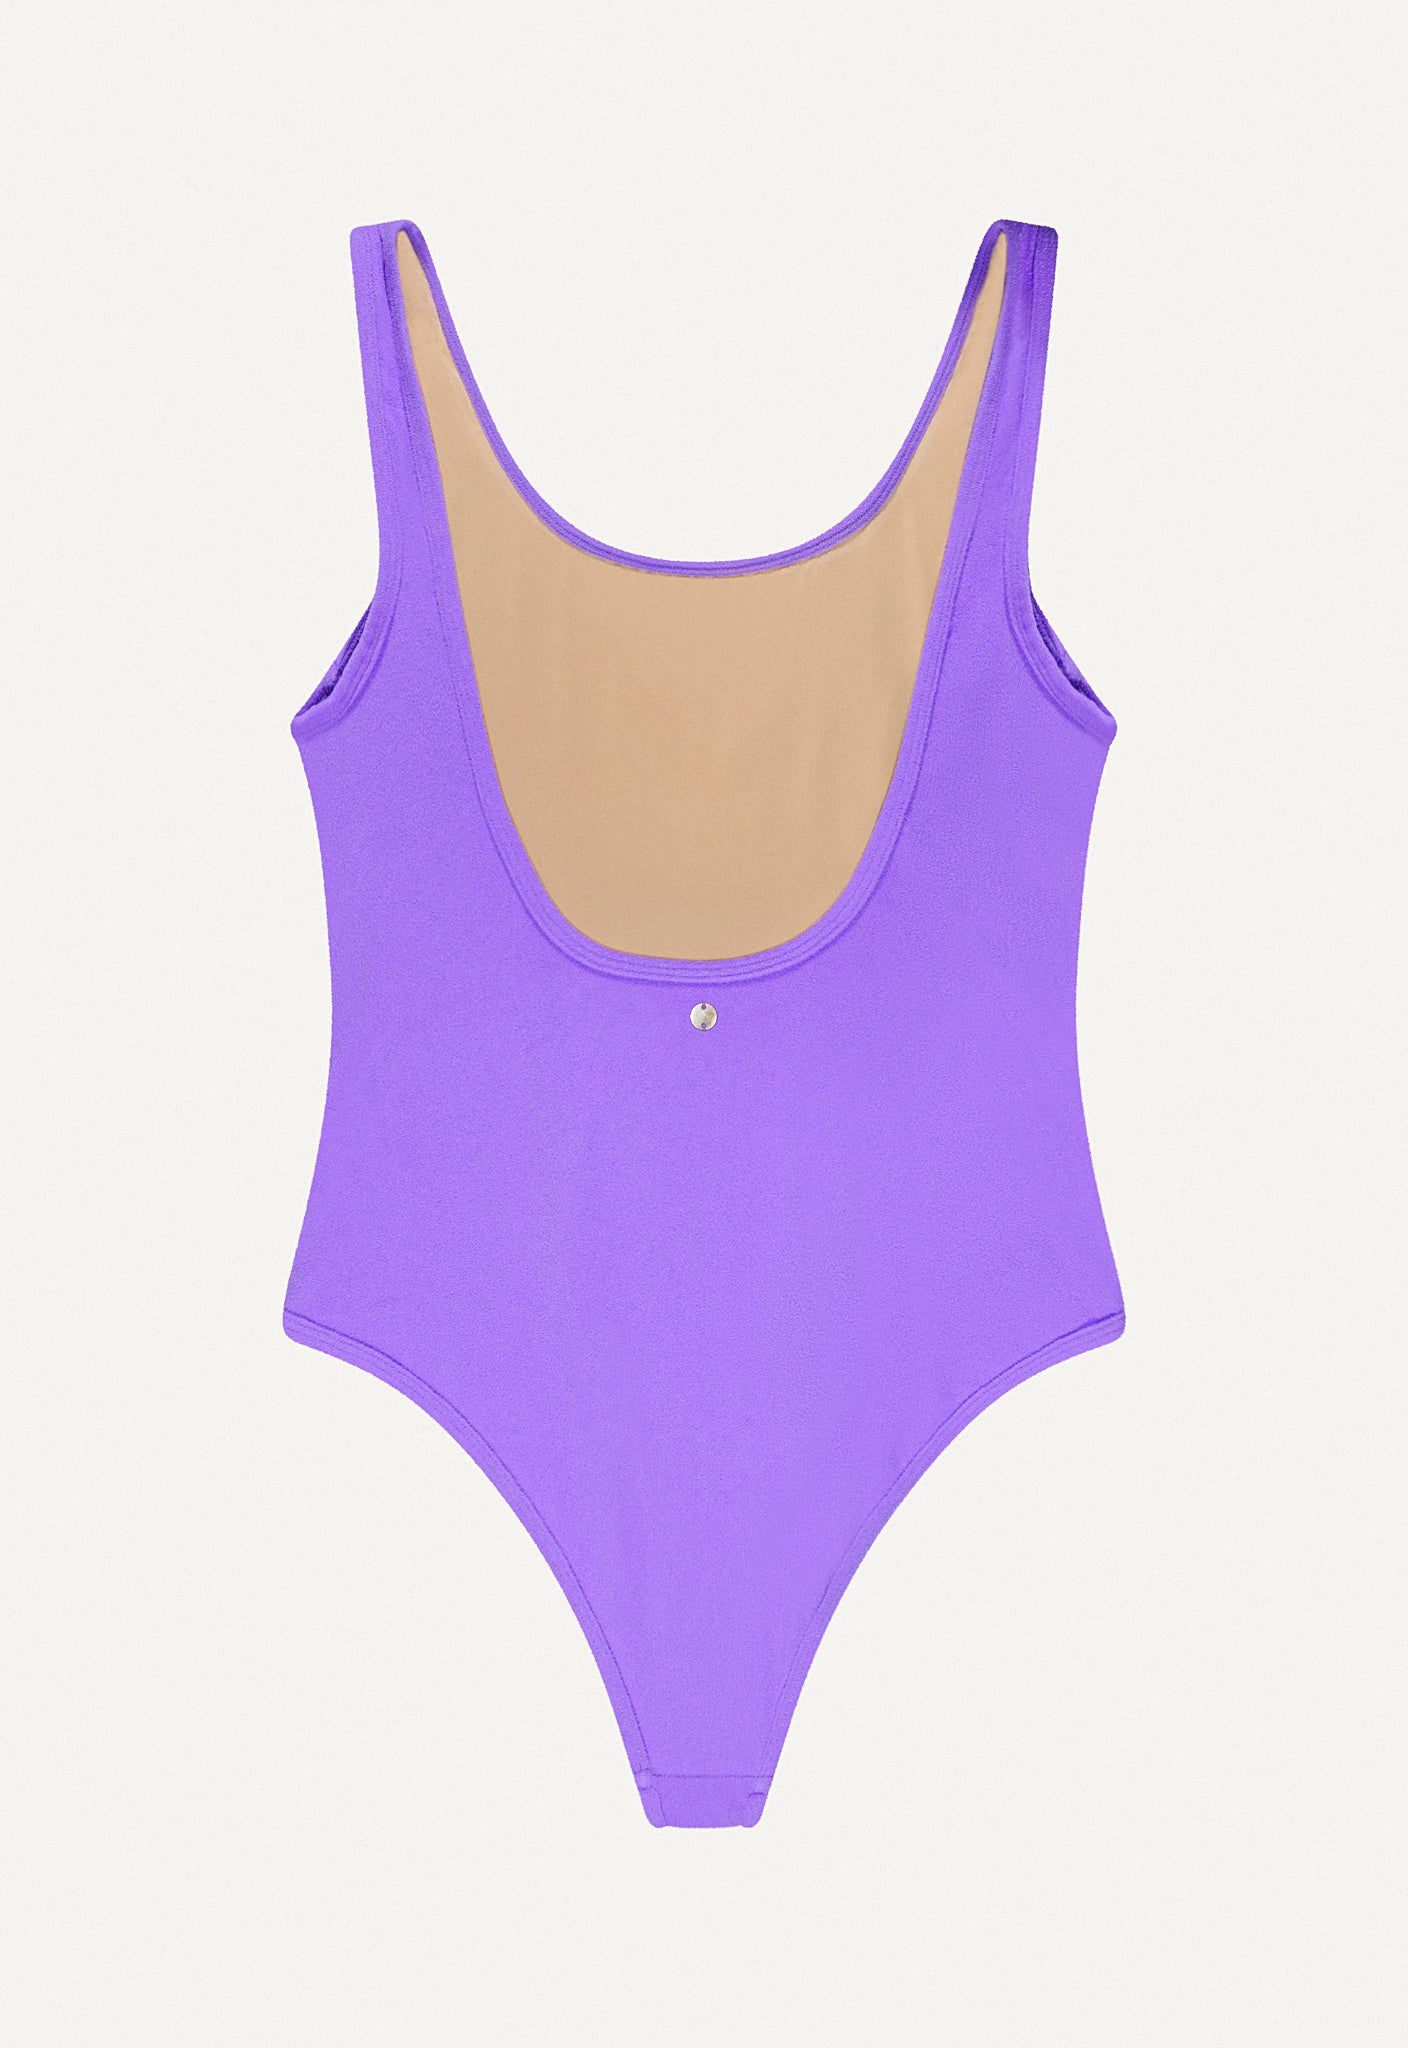 Swimsuit "Zephyr" in lilac terry